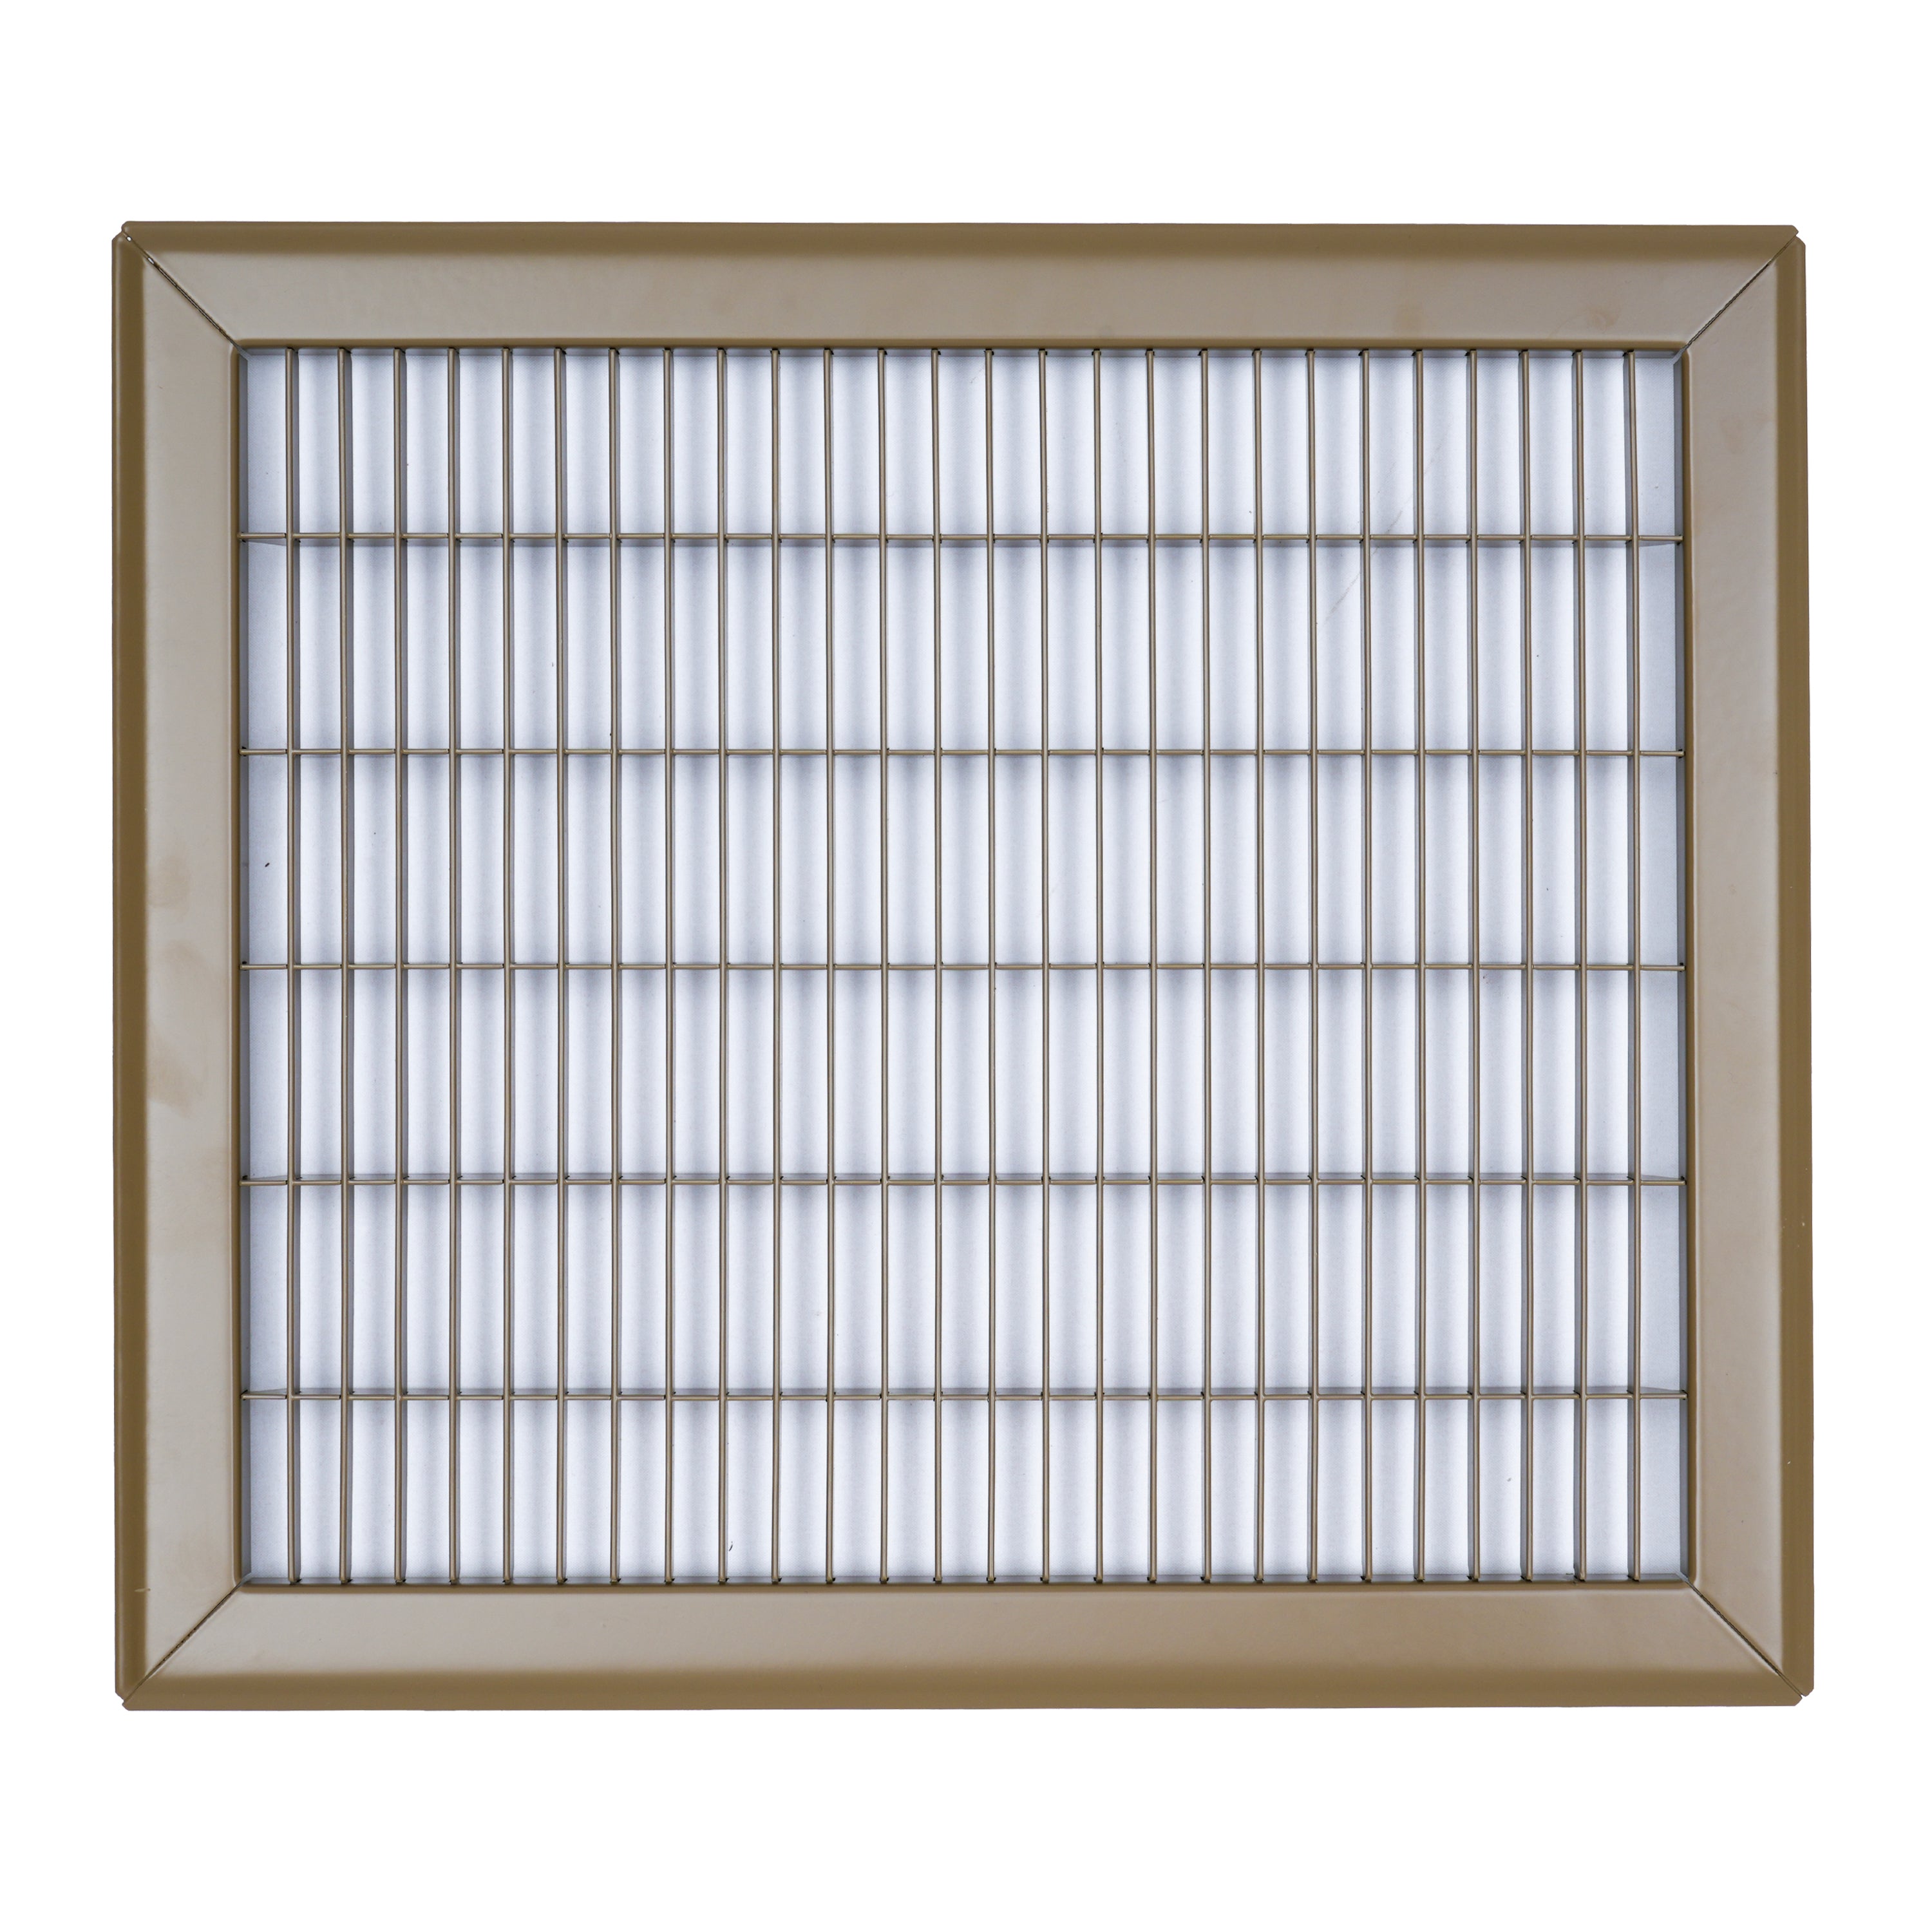 12"W x 14"H [Duct Opening] Return Air Floor Grille | Vent Cover Grill for Floor - Brown| Outer Dimensions: 13.75"W X 15.75"H